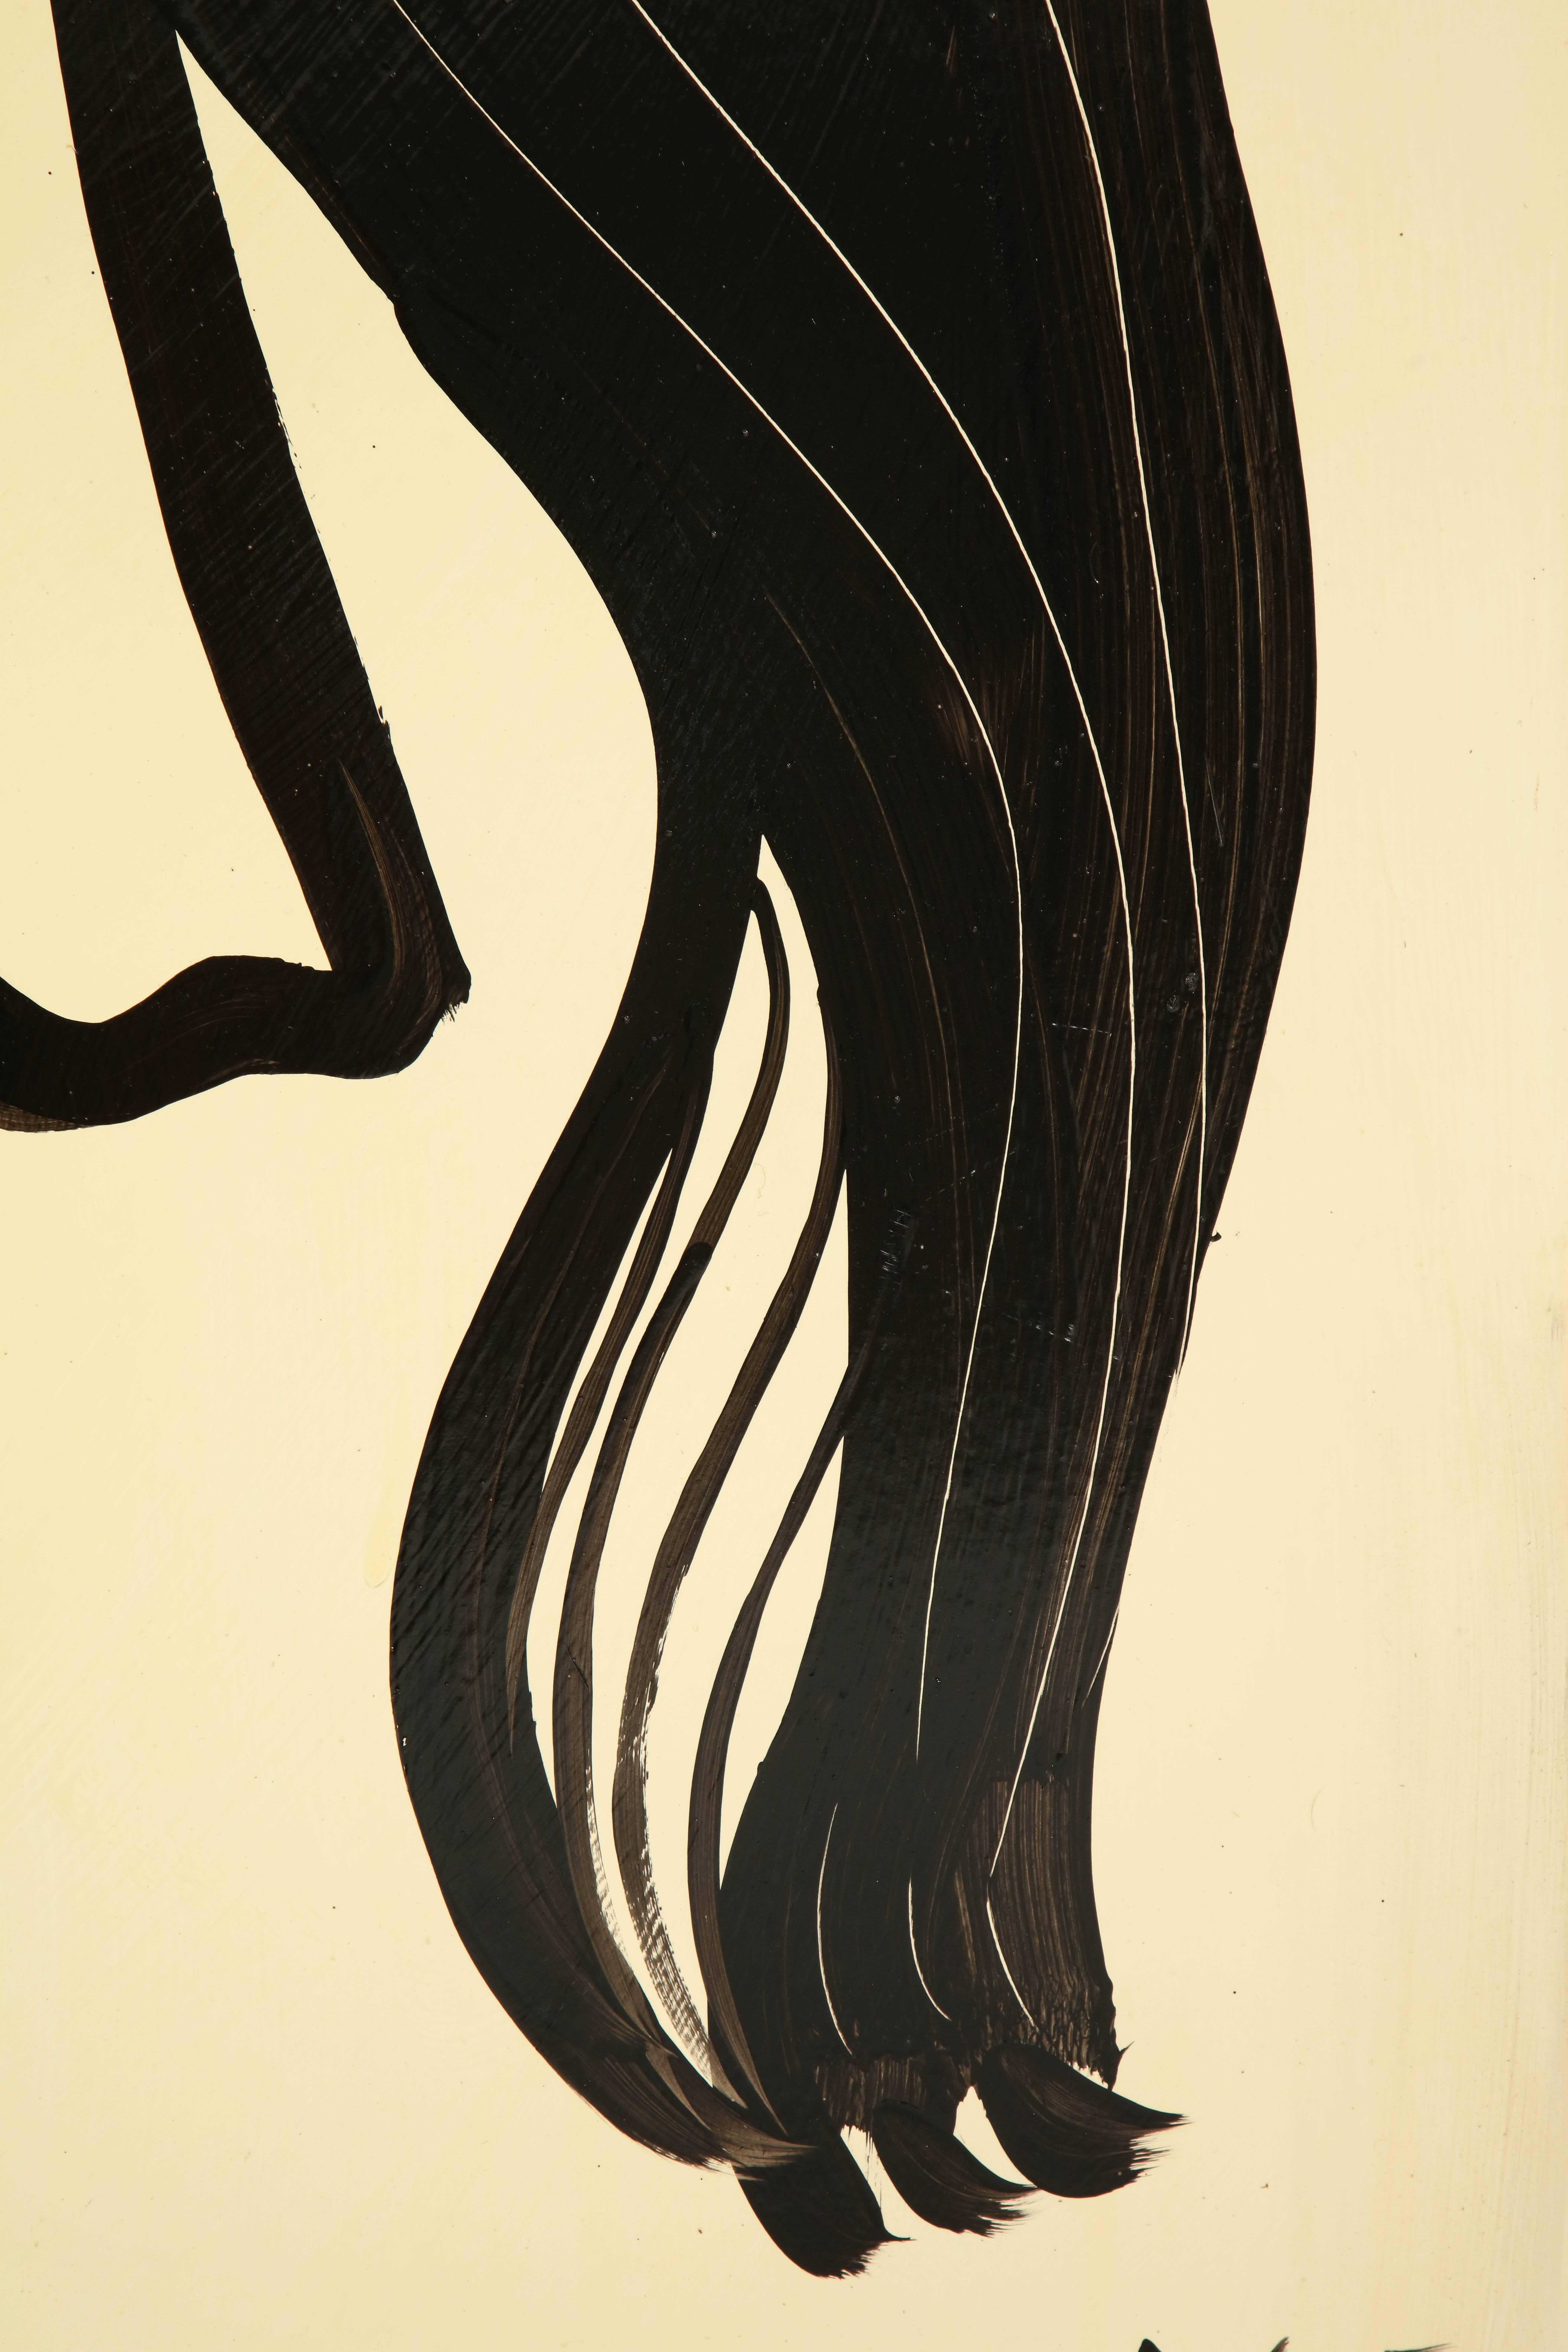 Painting by Peter Keil, Midcentury Art, Black and White Modern Art, circa 1967 1